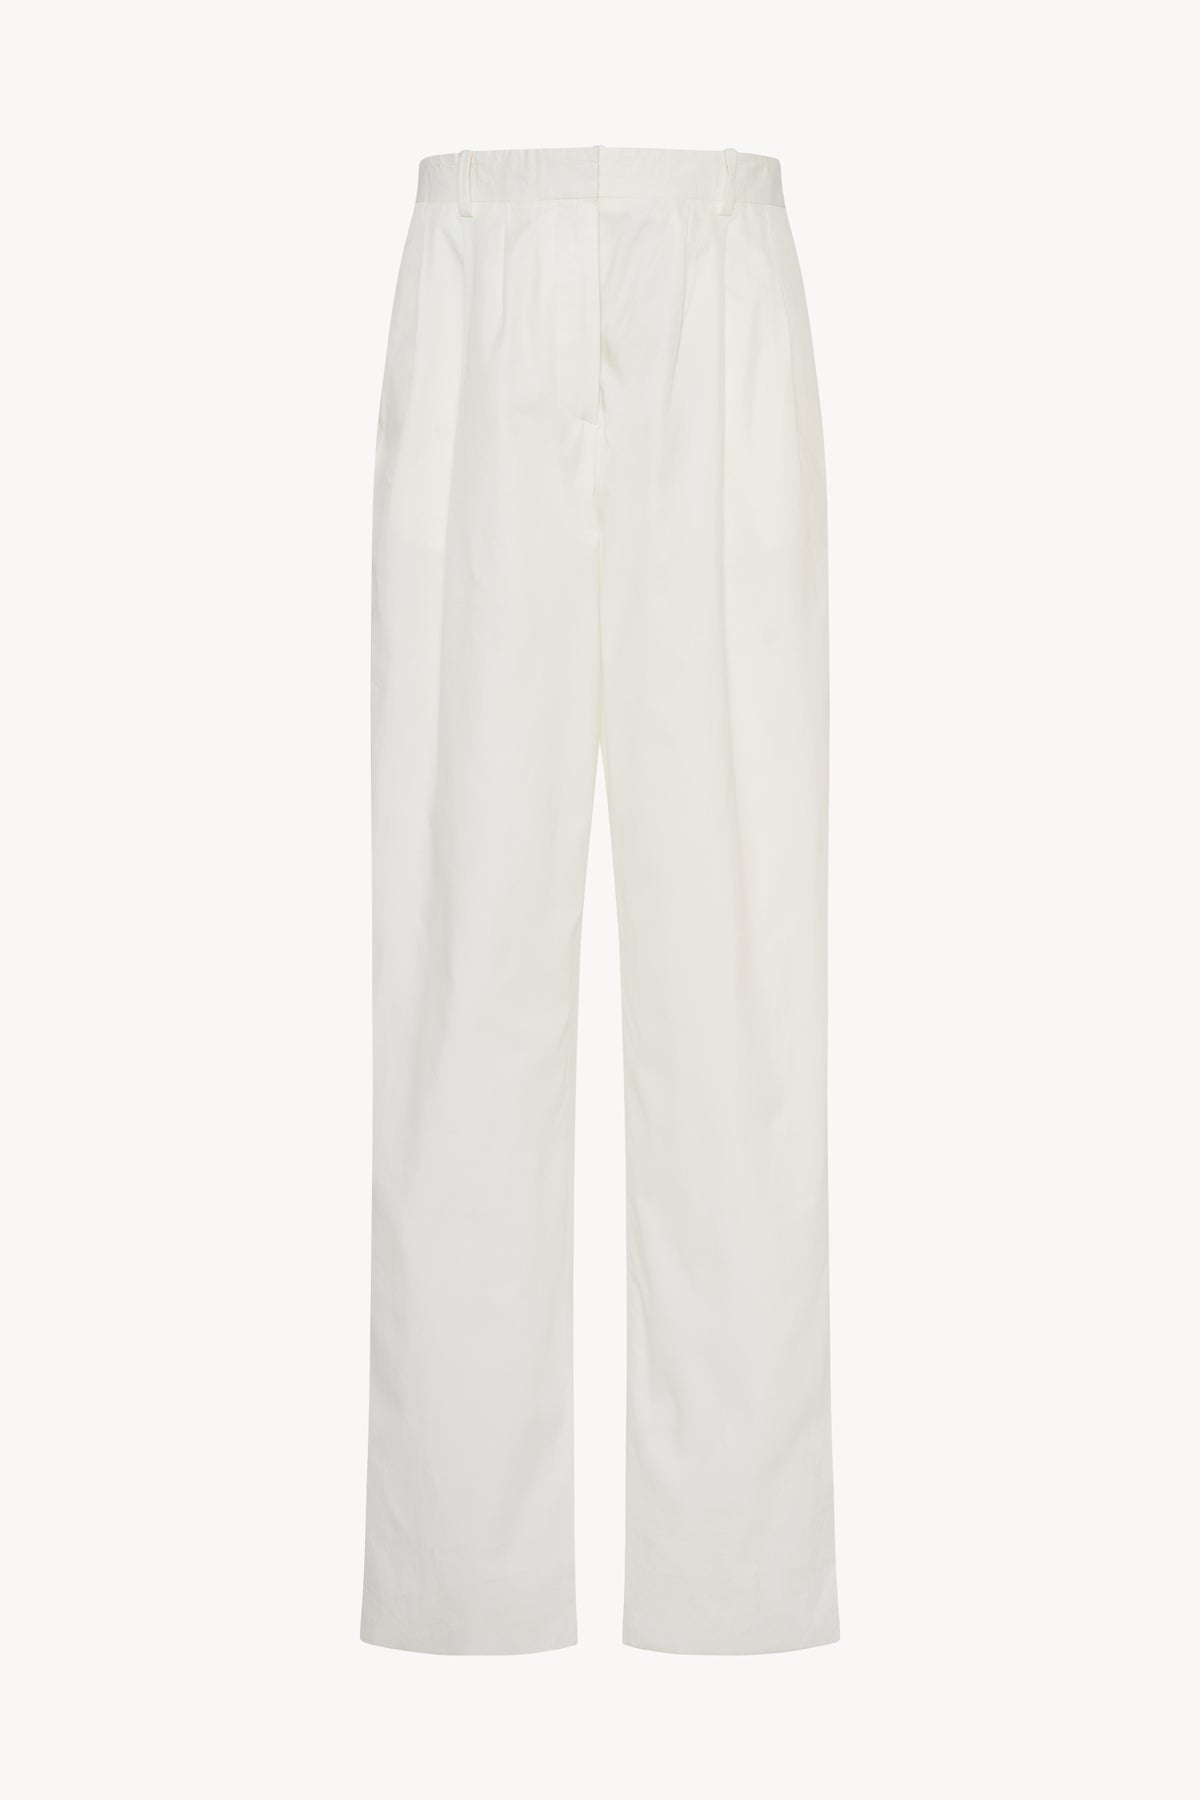 Bufus Pant in Cotton